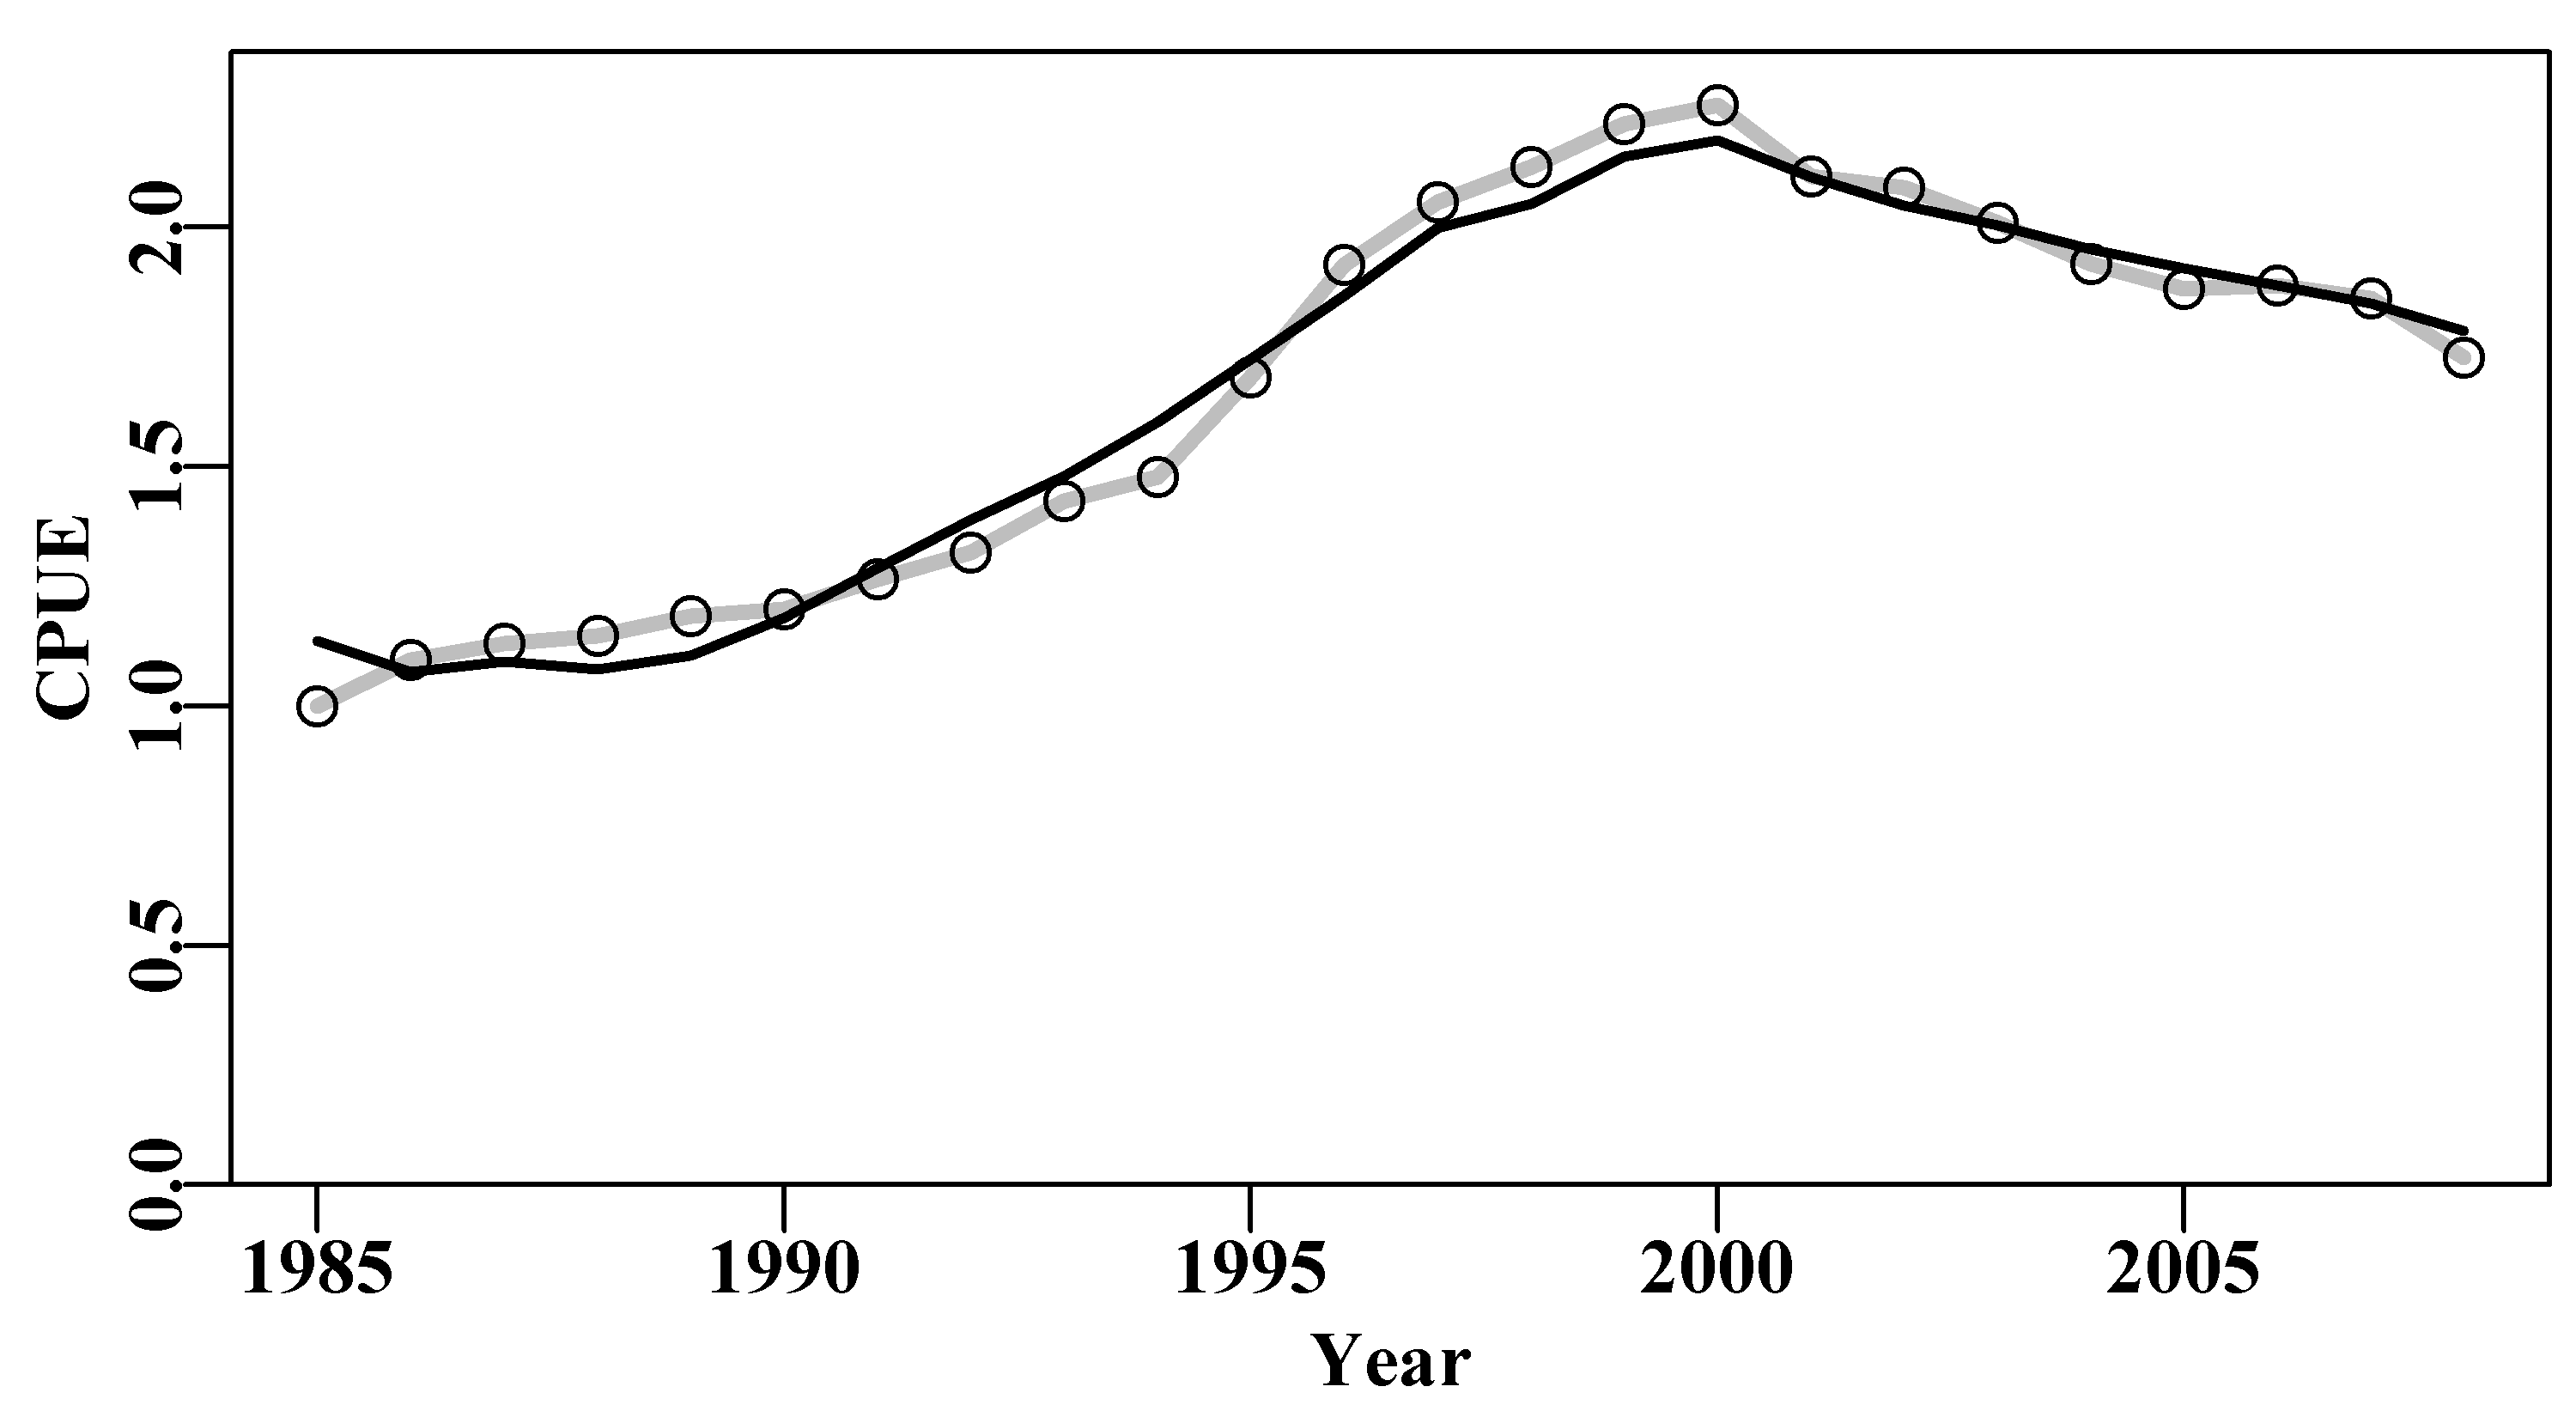 The optimum fit of the Schaefer surplus production model to the abdat data set plotted in linear-space (solid red-line). The grey line passes through the data points to clarify the difference with the predicted line.